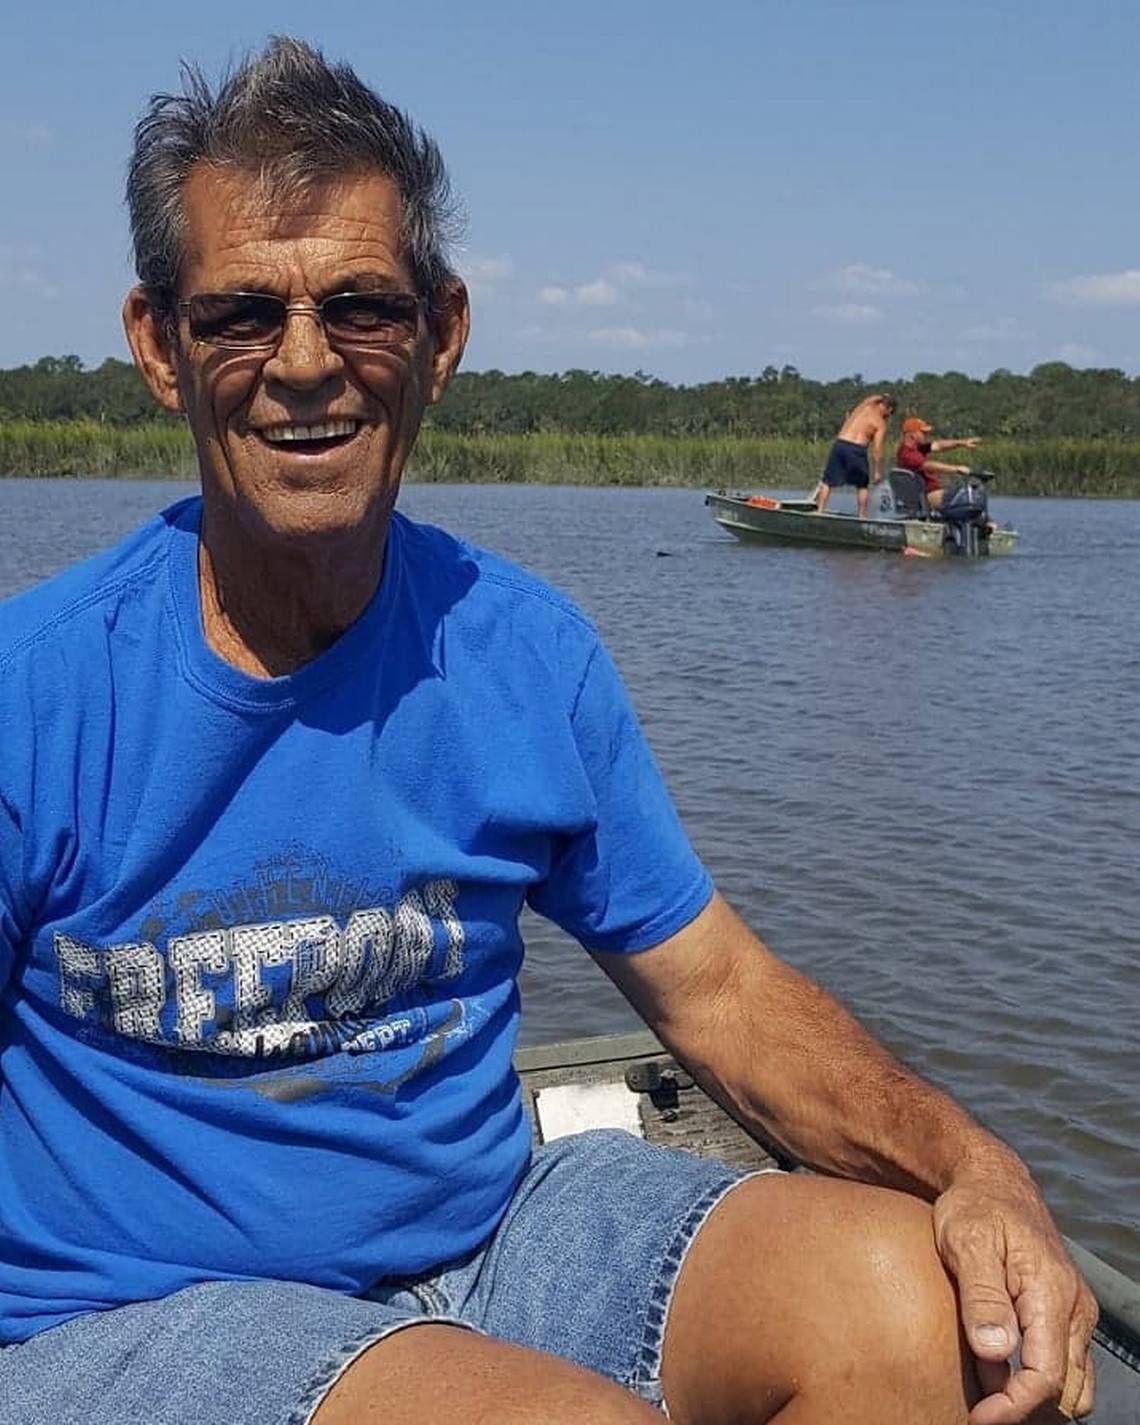 Billy Bailey was an avid fisherman loved by his family. The western North Carolina log home builder died in 2017 after a fishing trip to Edisto Beach, S.C. A dangerous microbe found in the bays and inlets of the Carolinas infected him. Image courtesy of Karan Gordon. United States, undated.